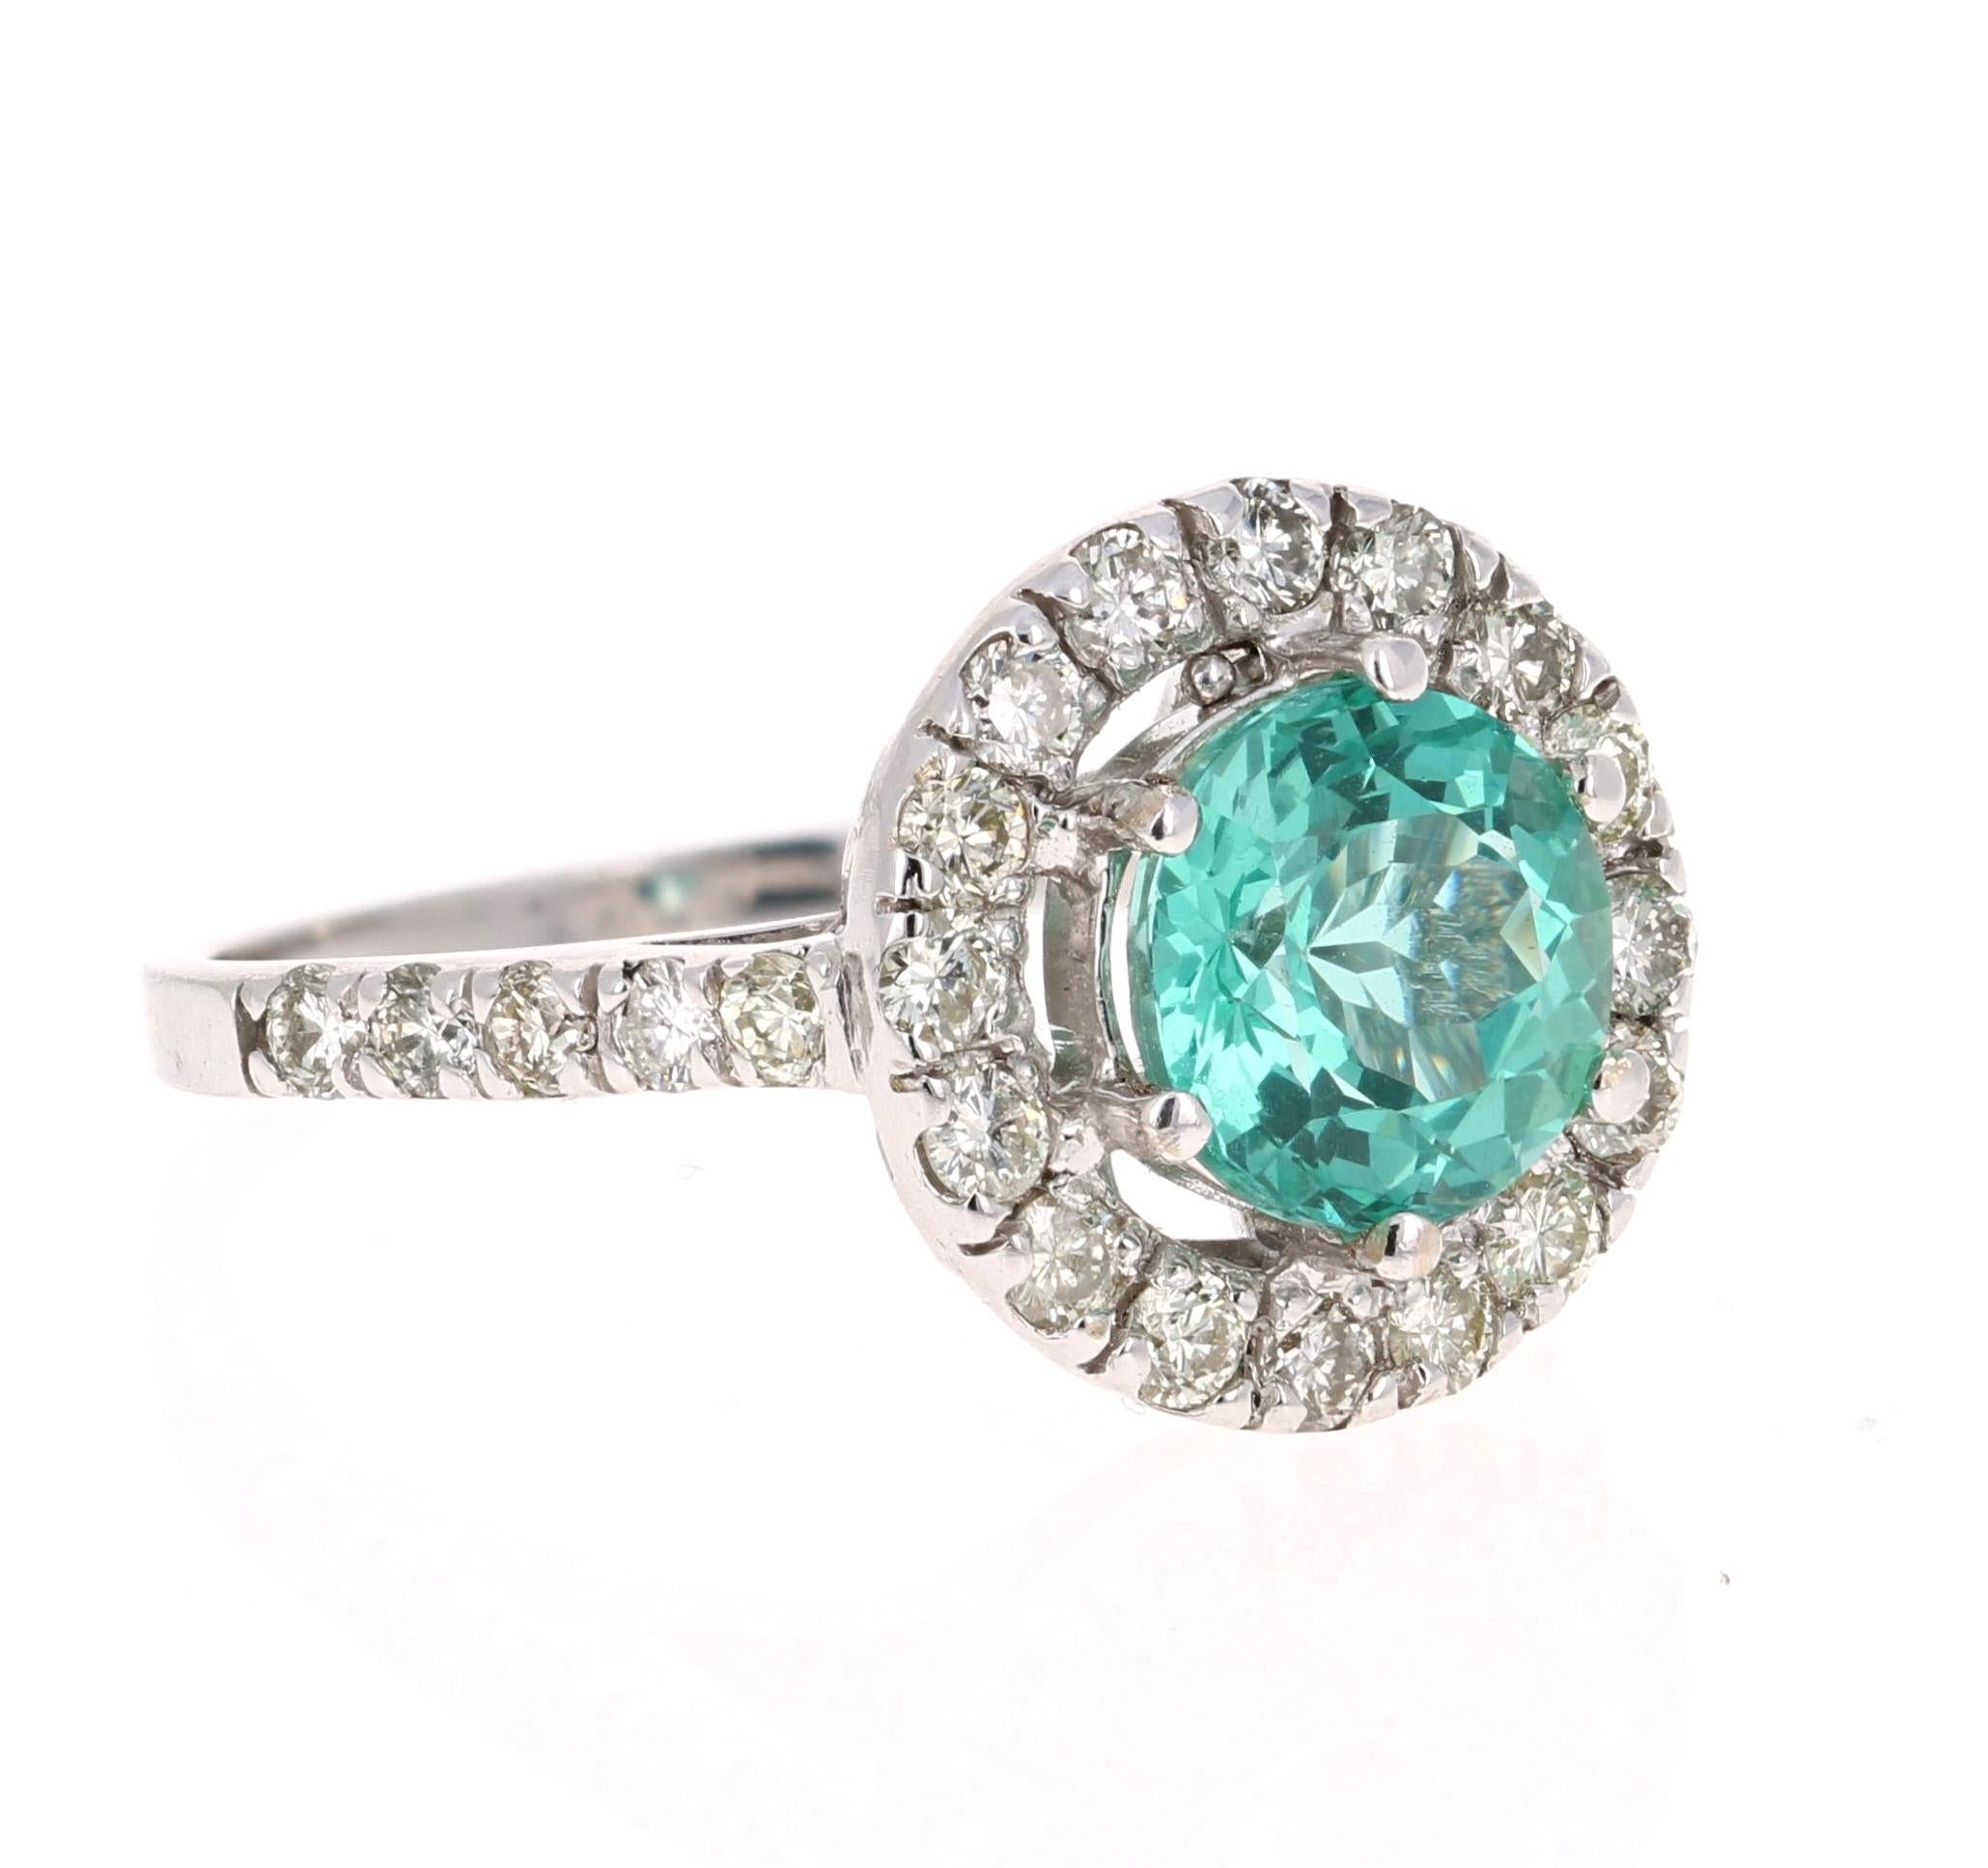 Gorgeous Halo Apatite and Diamond Ring.  This ring has a Round Cut 1.91 Carat Apatite and is surrounded by a halo of 50 Round Cut Diamonds that weigh 1.02 carat (Clarity: VS, Color: F).  The total carat weight of the ring is 2.93 Carats.  

Apatites